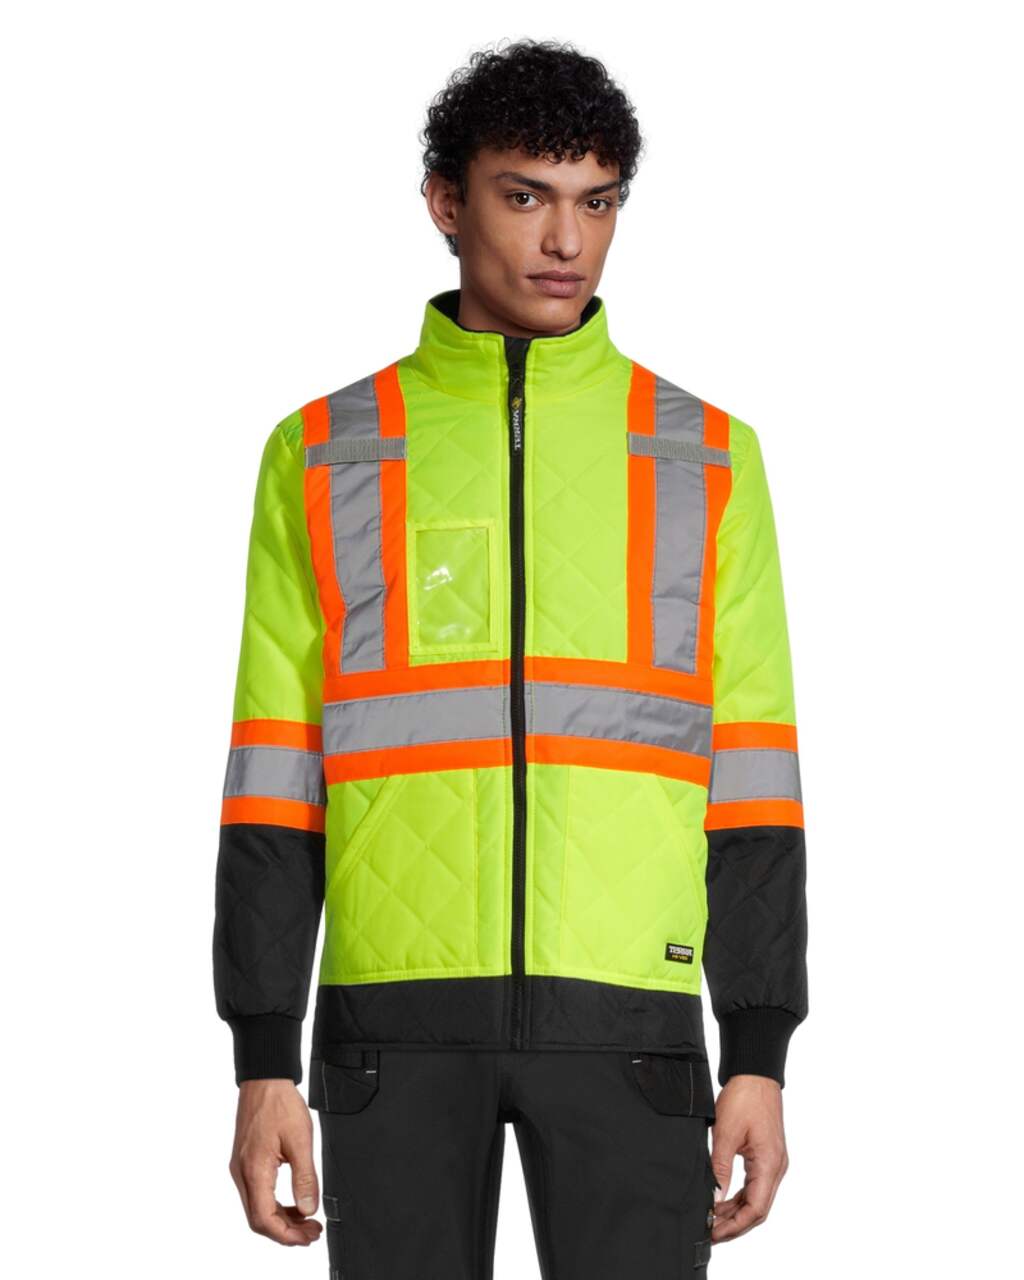 Terra Hi-Vis Lined Work Jacket with Reflective Tape and Stand up